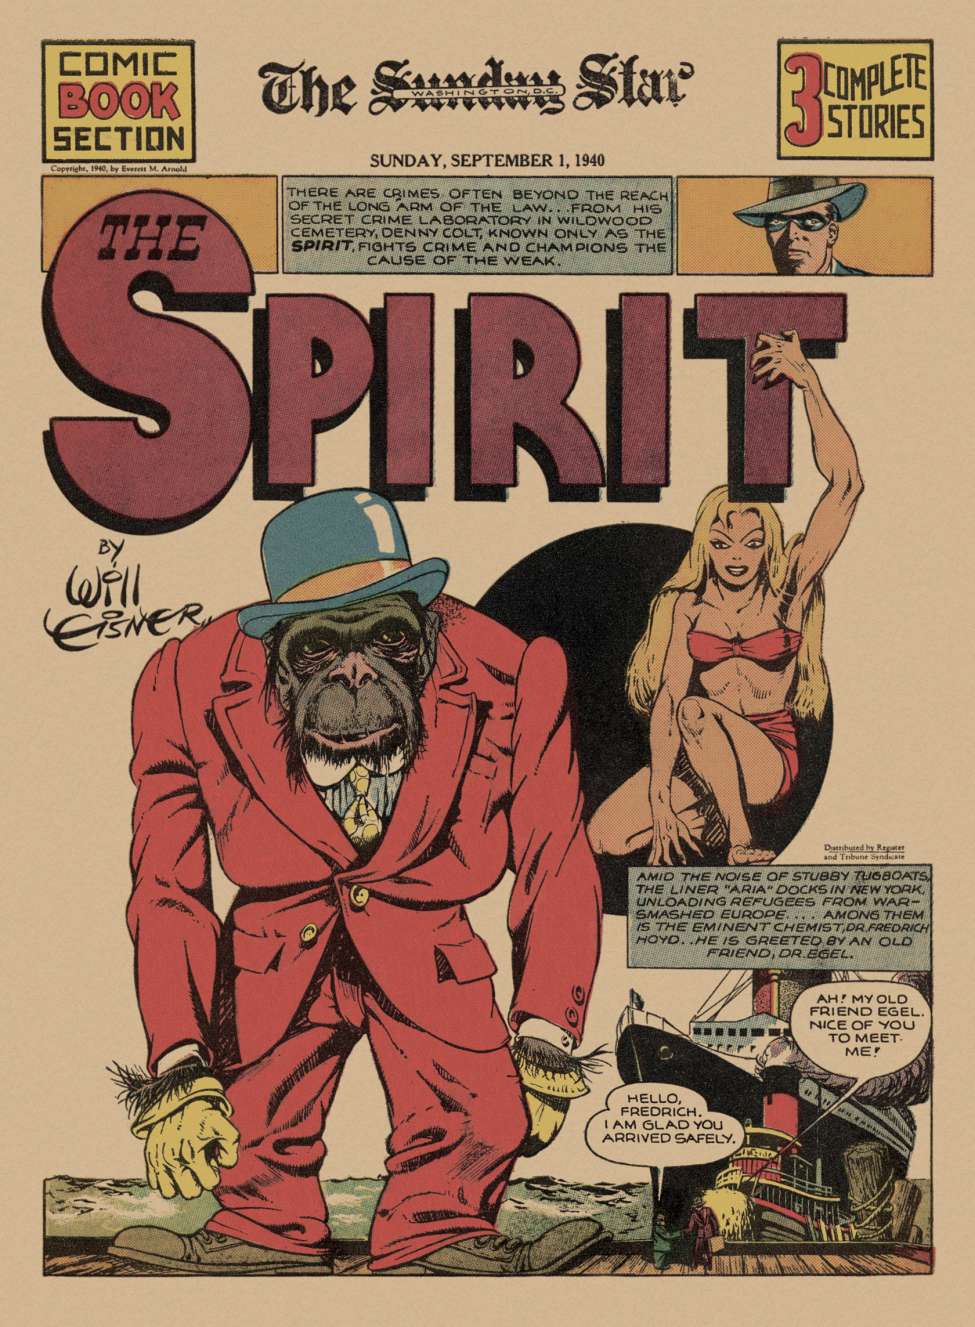 Book Cover For The Spirit (1940-09-01) - Sunday Star